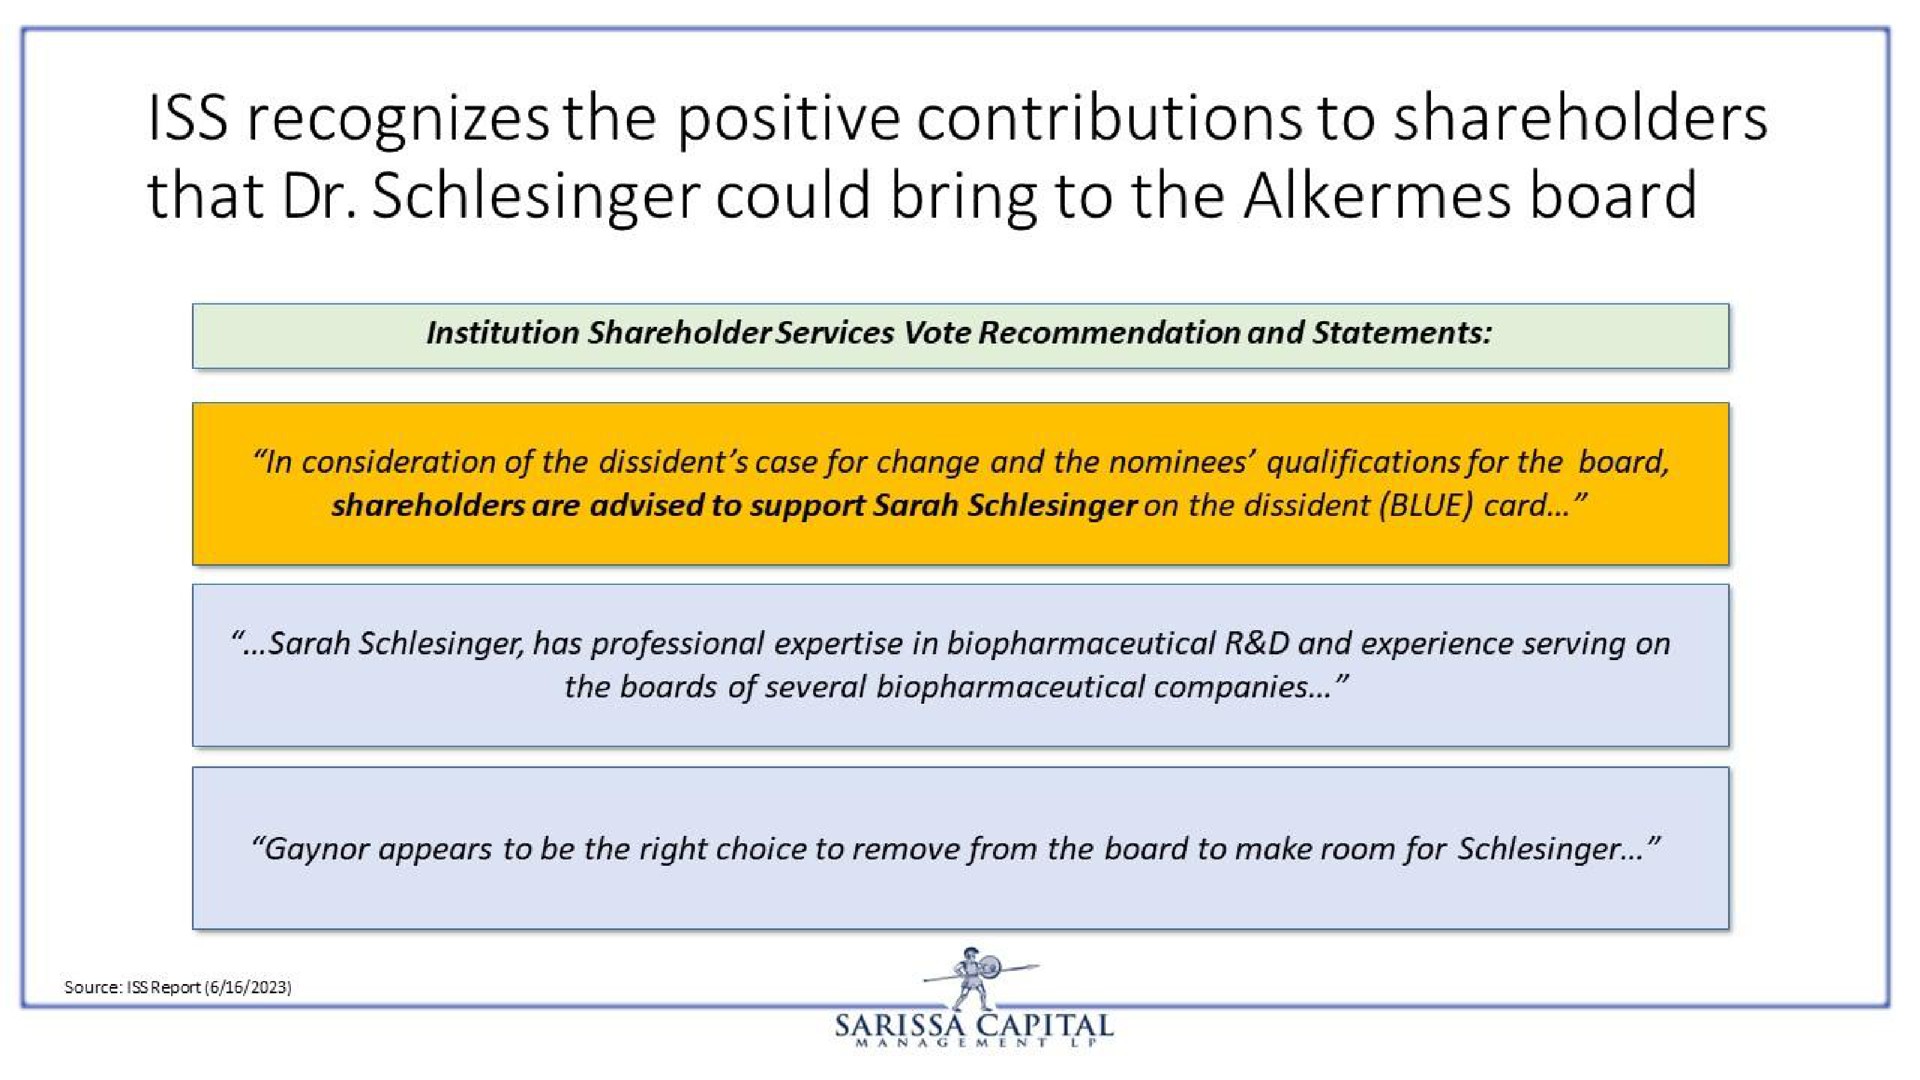 iss recognizes the positive contributions to shareholders that could bring to the alkermes board | Sarissa Capital